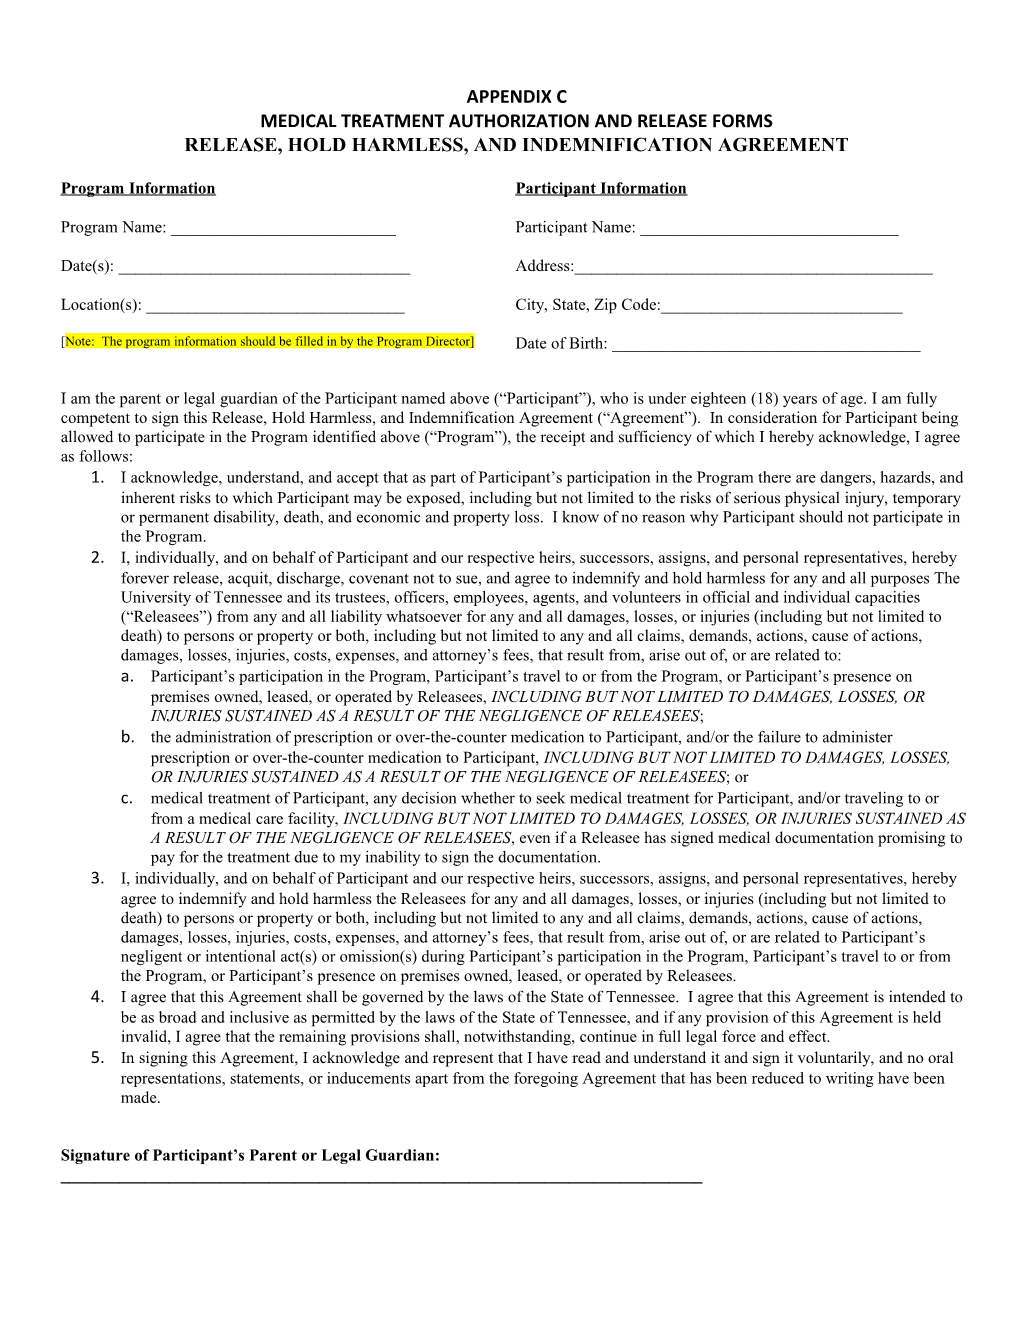 Medical Treatment Authorization and Release Forms